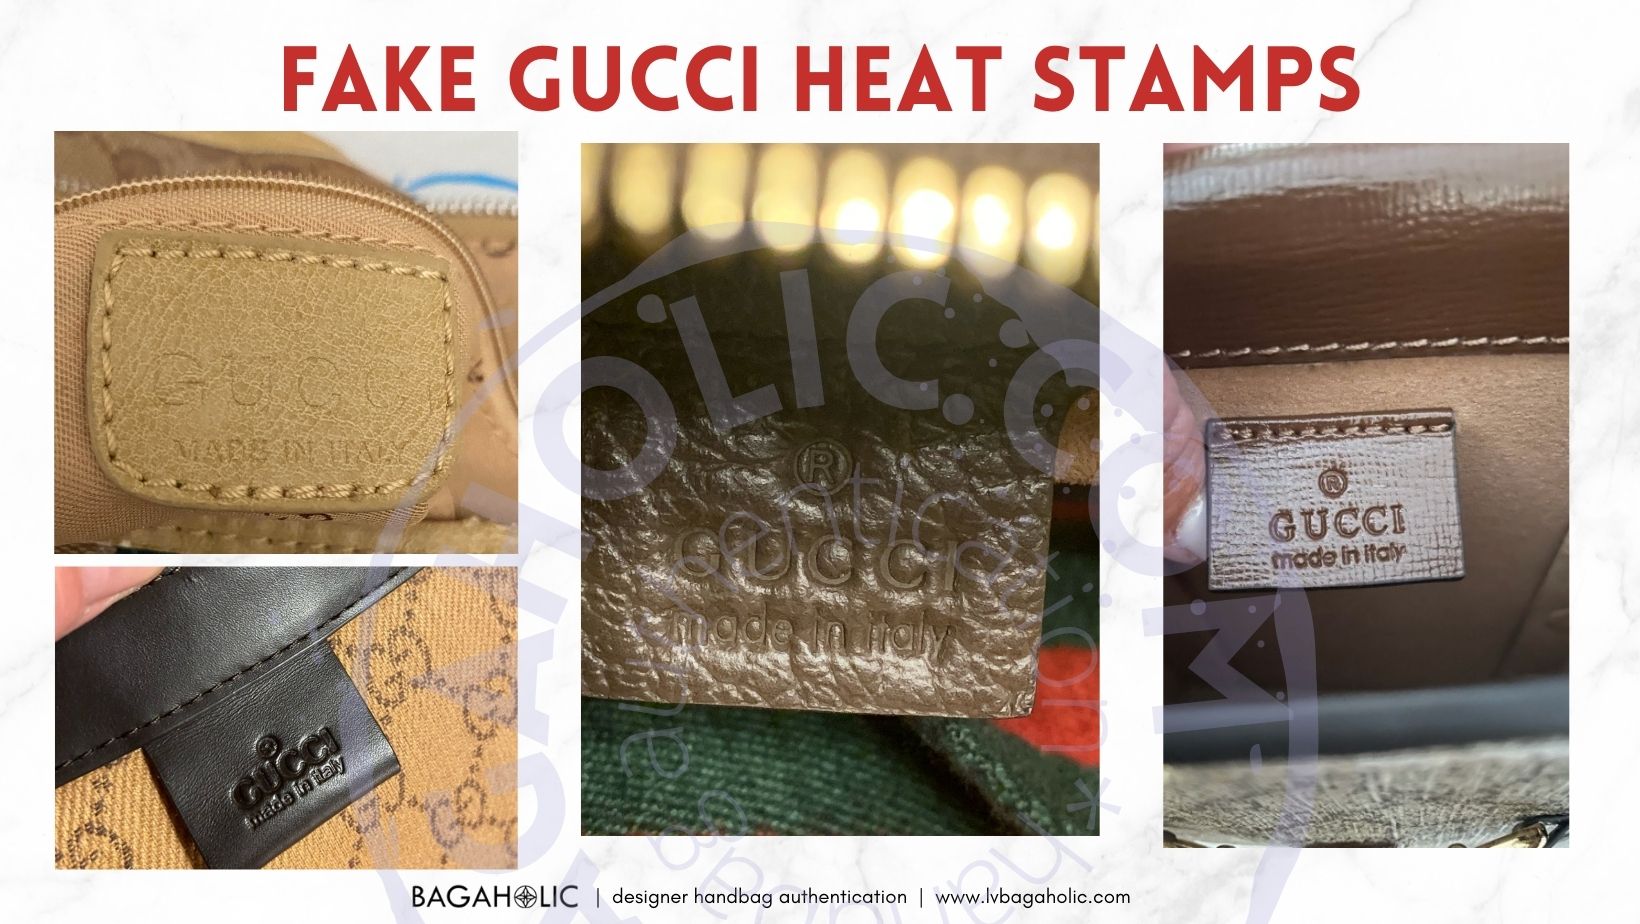 How to Detect a Fake Gucci Bag Using QR Codes for Authentication - QR TIGER